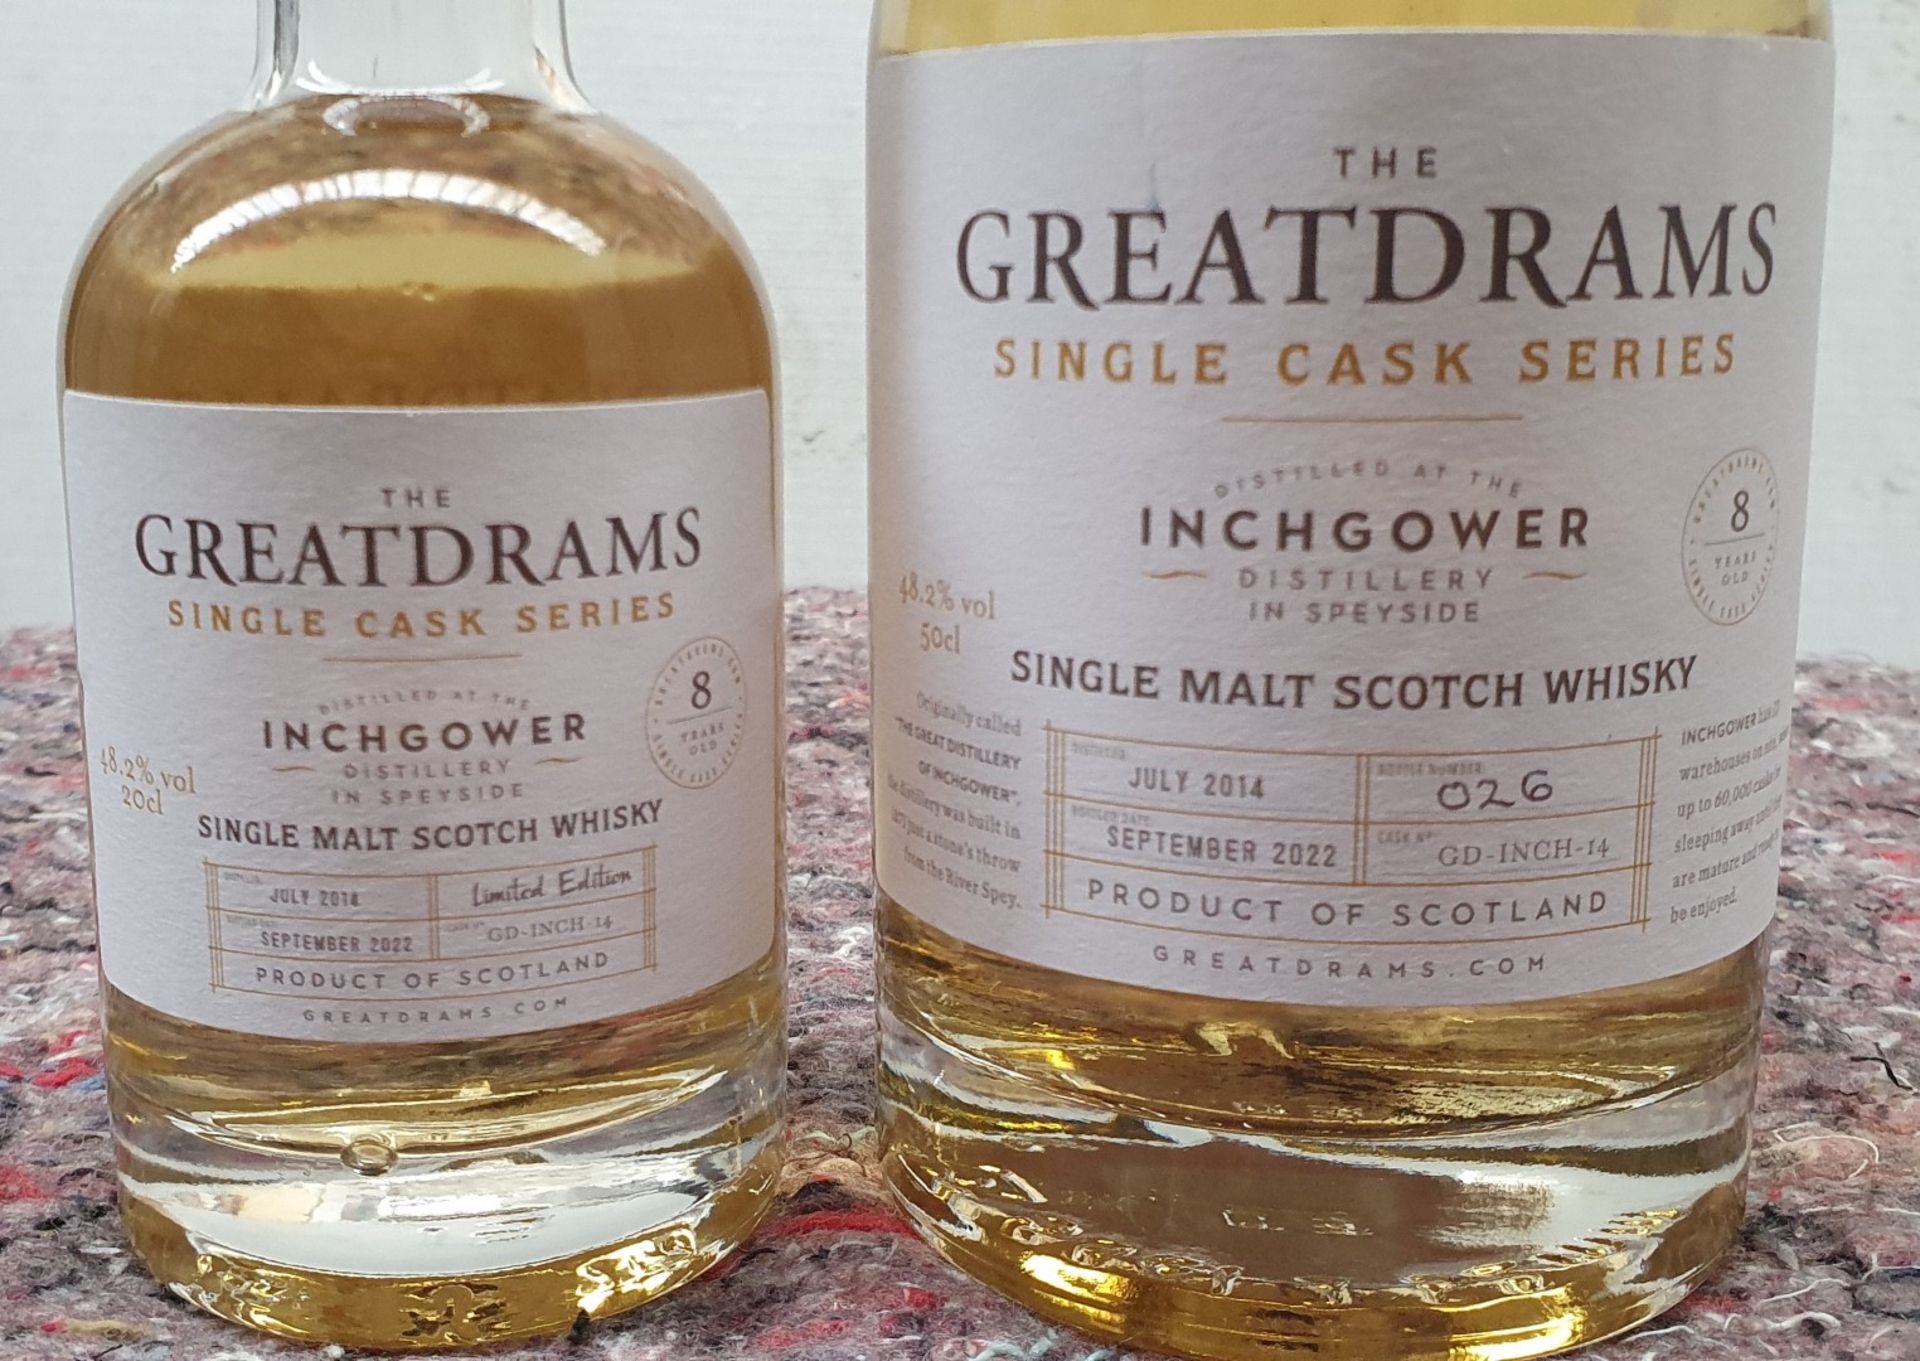 2 x Bottles of Greatdrams Single Cask Series Inchgower Single Malt Scotch Whisky - Includes 20cl and - Image 2 of 4